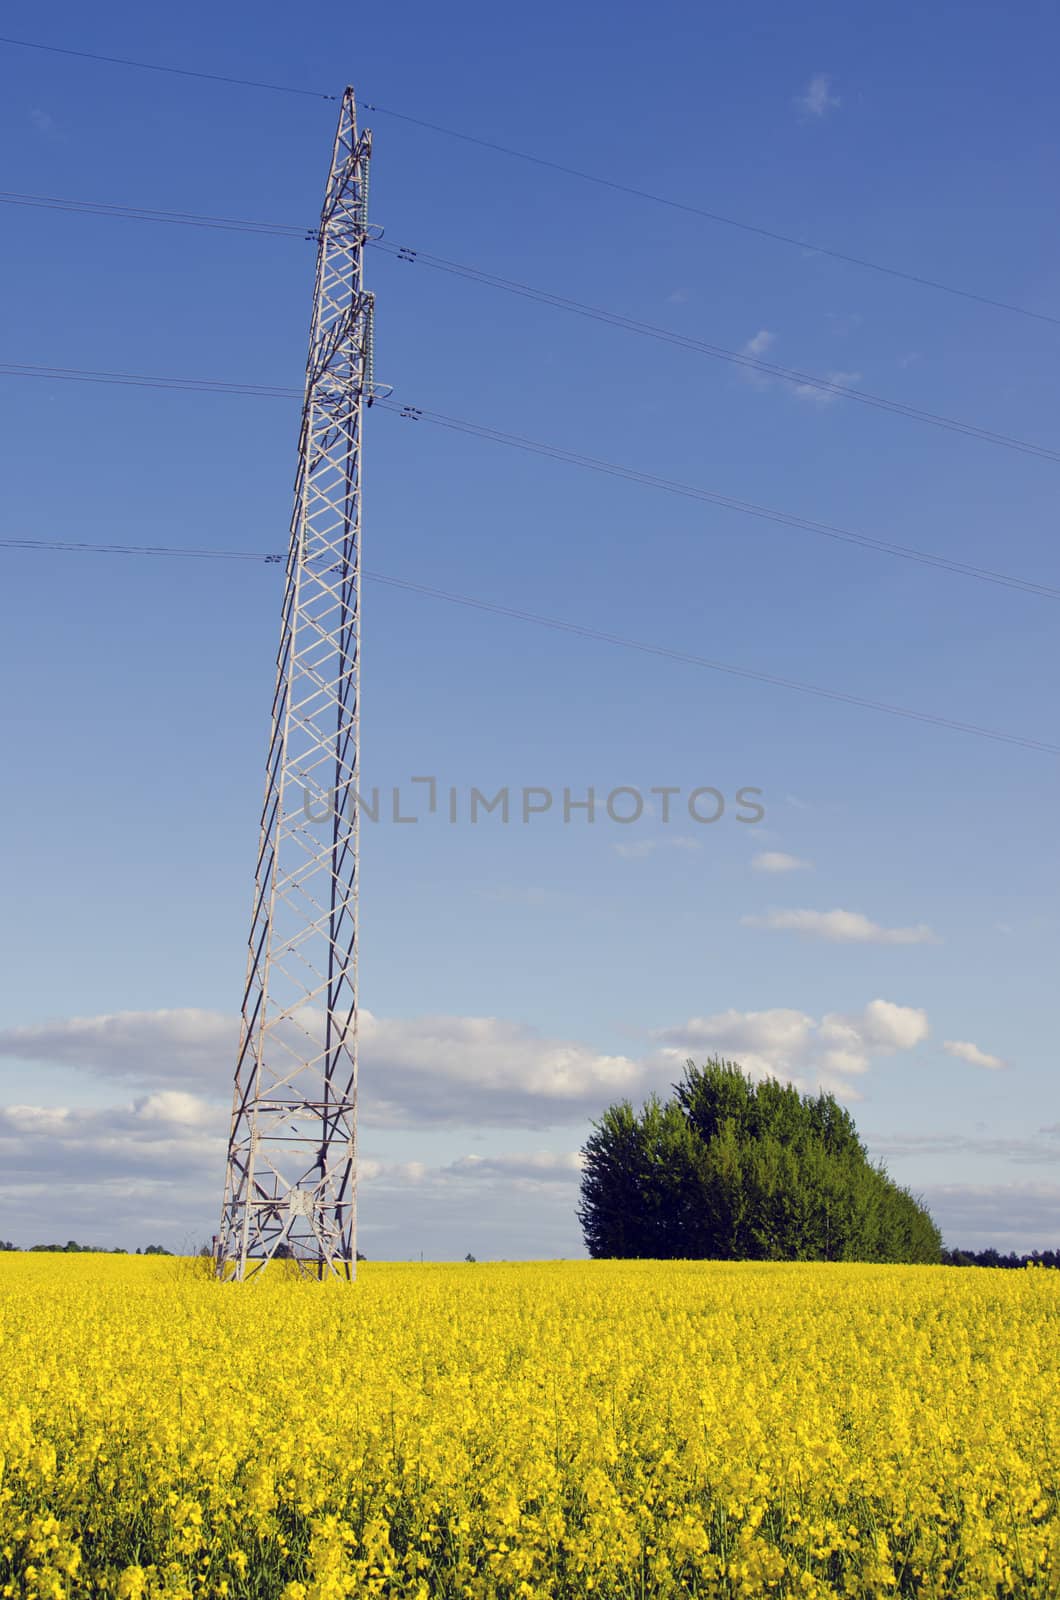 High voltage electric pole and wire on background of agricultural rape fields and blue cloudy sky. Power and energy industry.